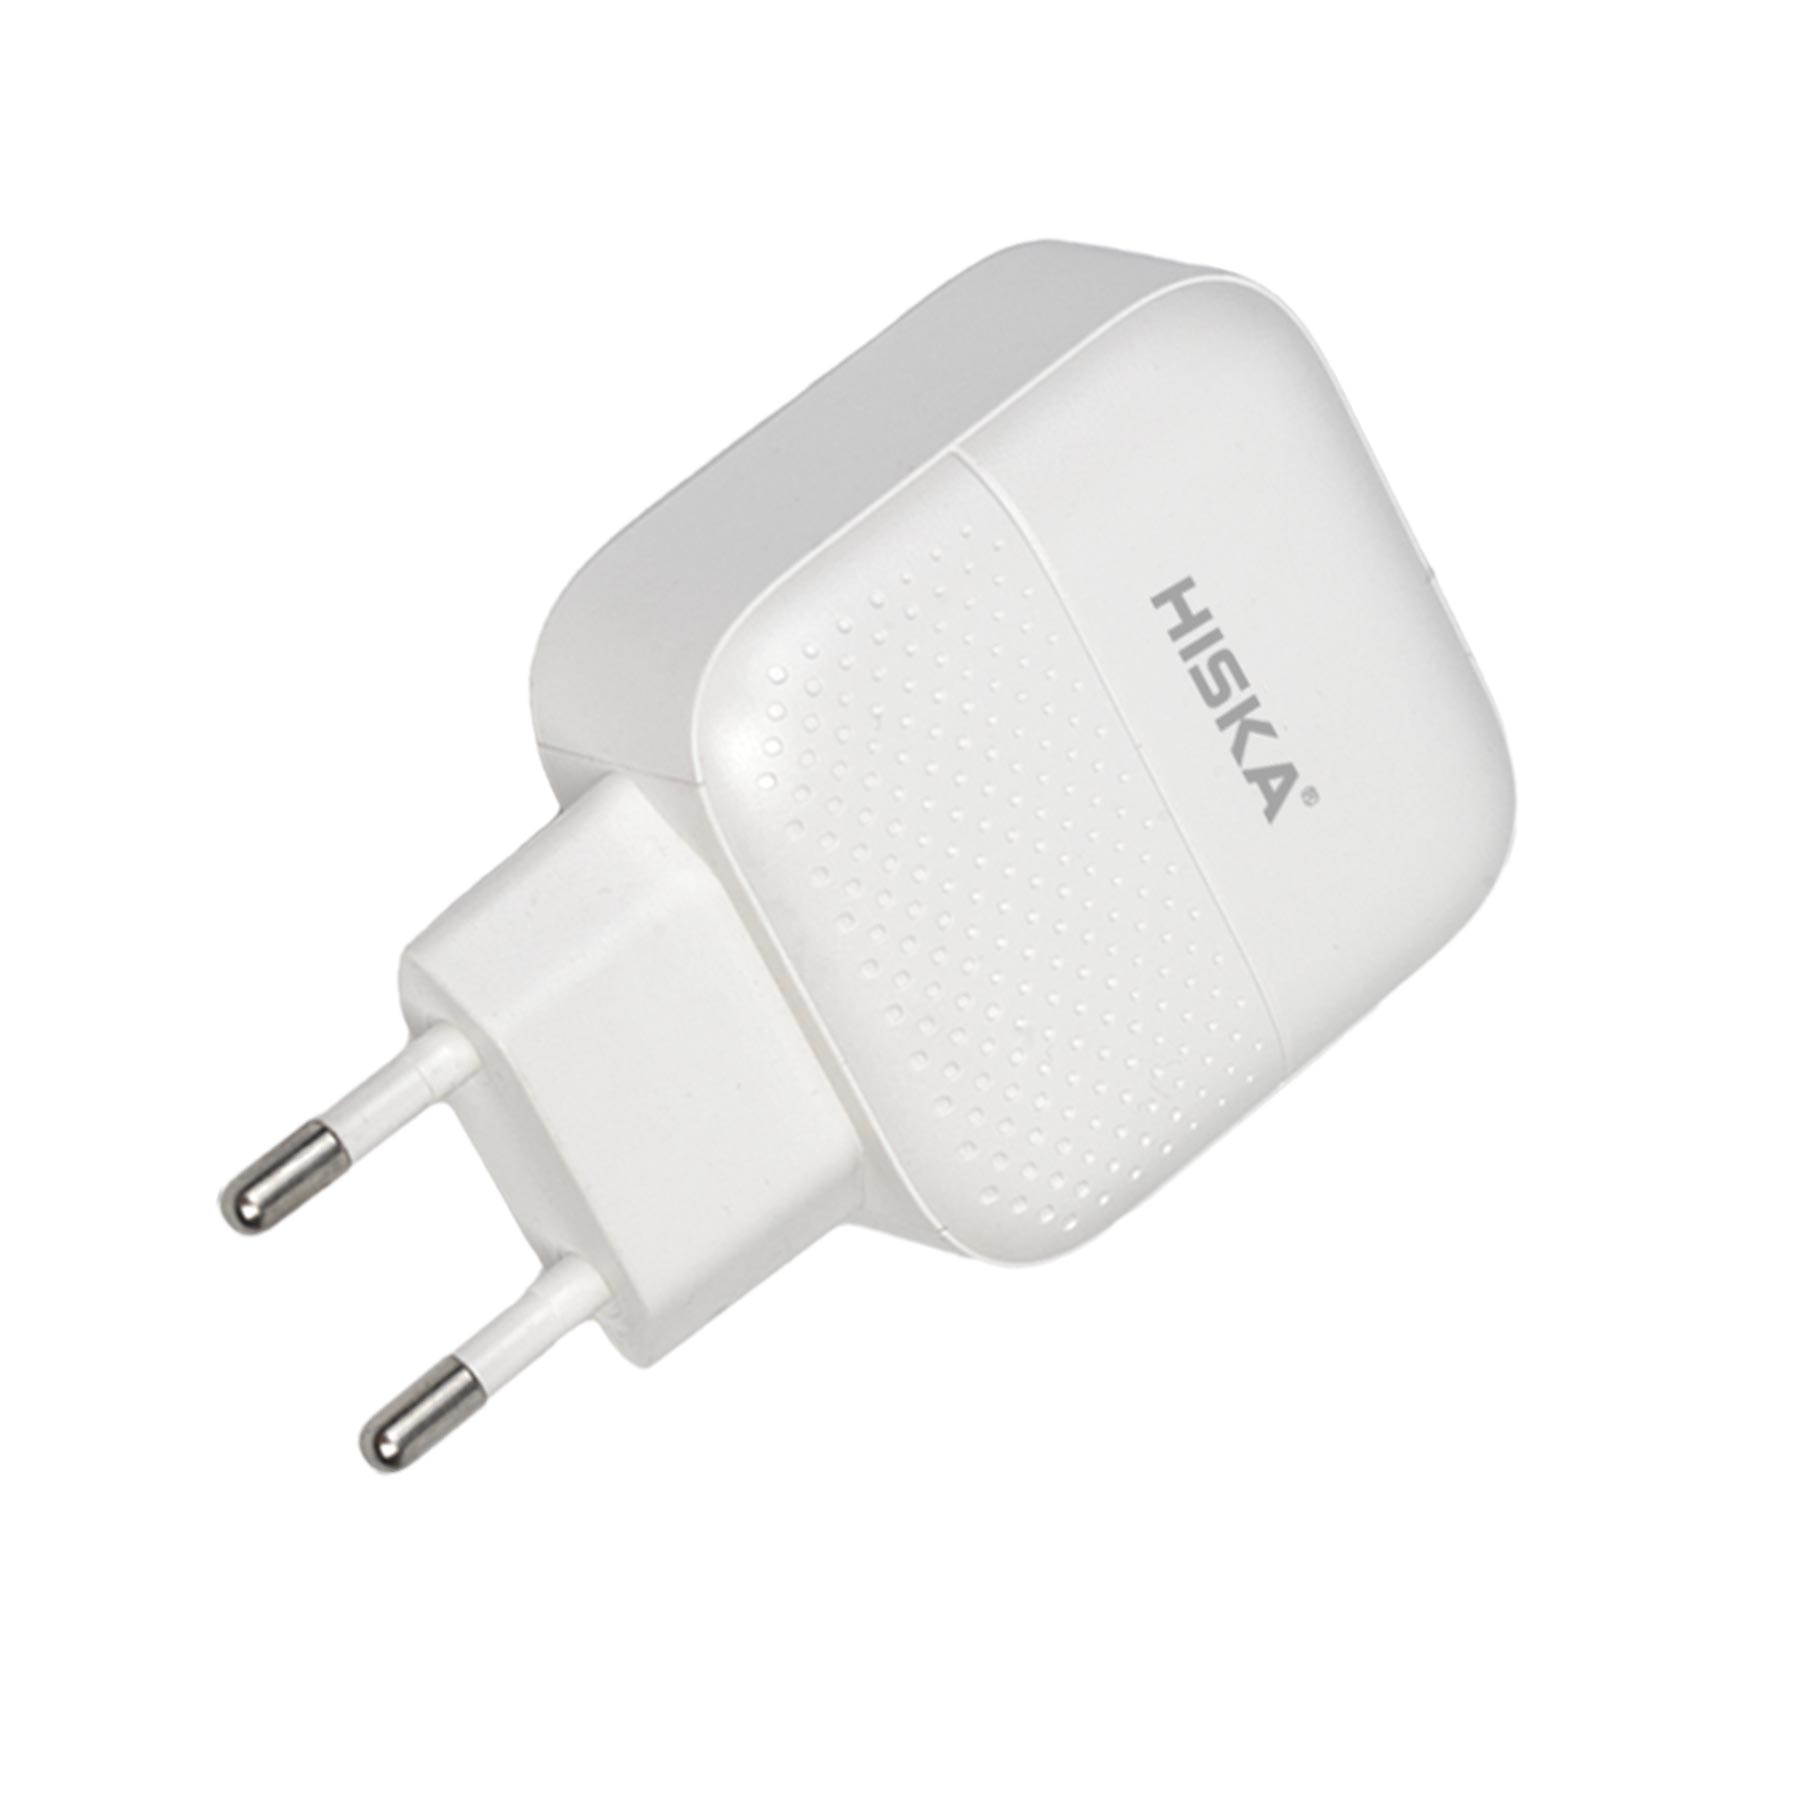 HK-2214 Wall charger H-111Q